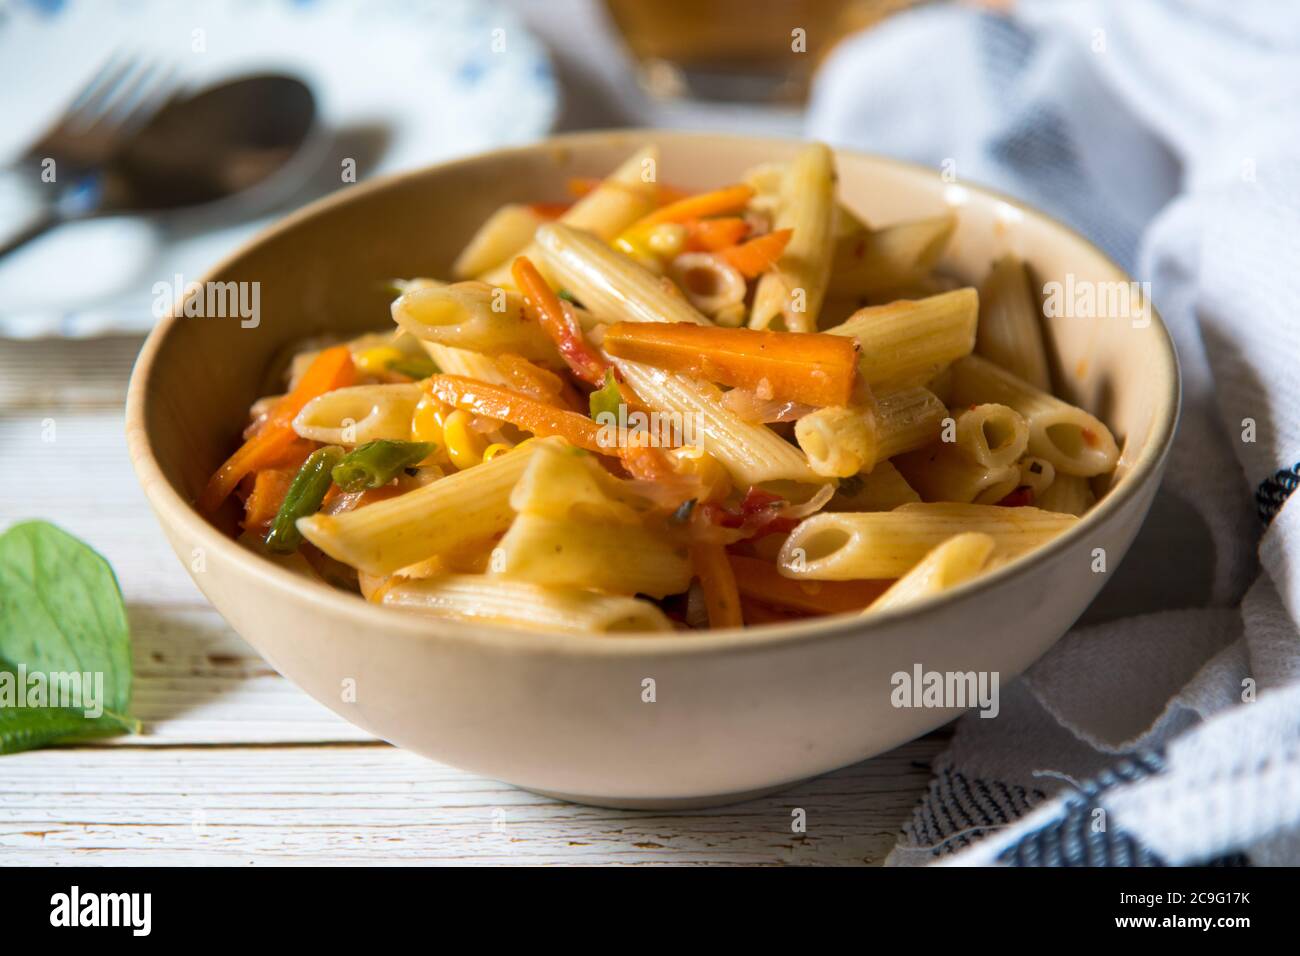 Close up of ready to eat cooked pasta served in a bowl on a background Stock Photo